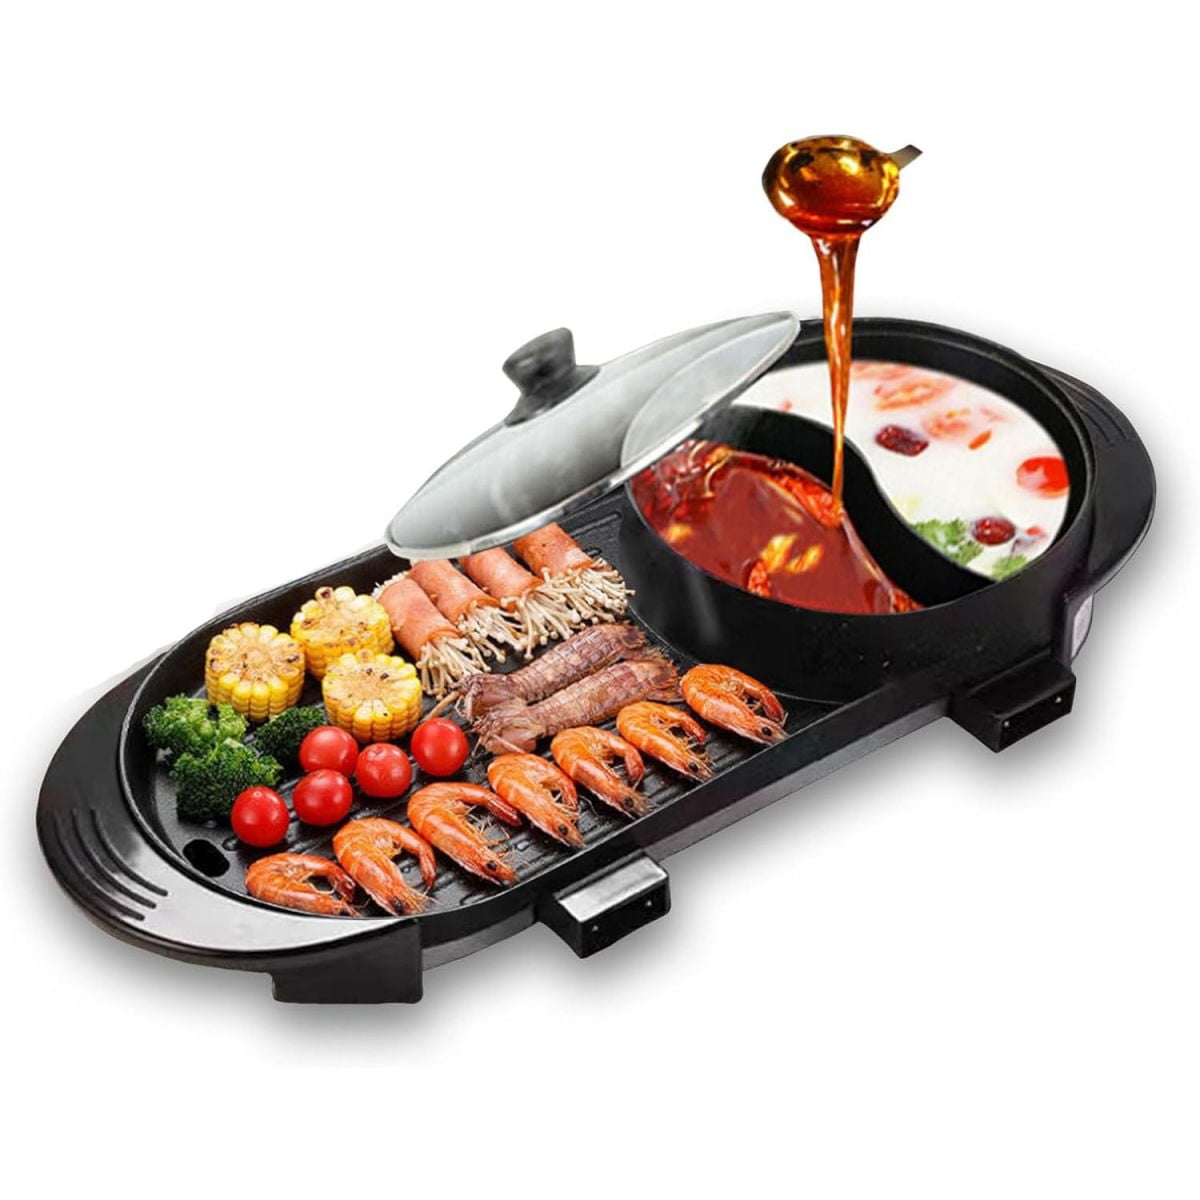 Dropship Geek Chef 7 In 1 Smokeless Electric Indoor Grill With Air Fry,  Roast, Bake, Portable 2 In 1 Indoor Tabletop Grill & Griddle With Preset  Function, Removable Non-Stick Plate, Air Fryer